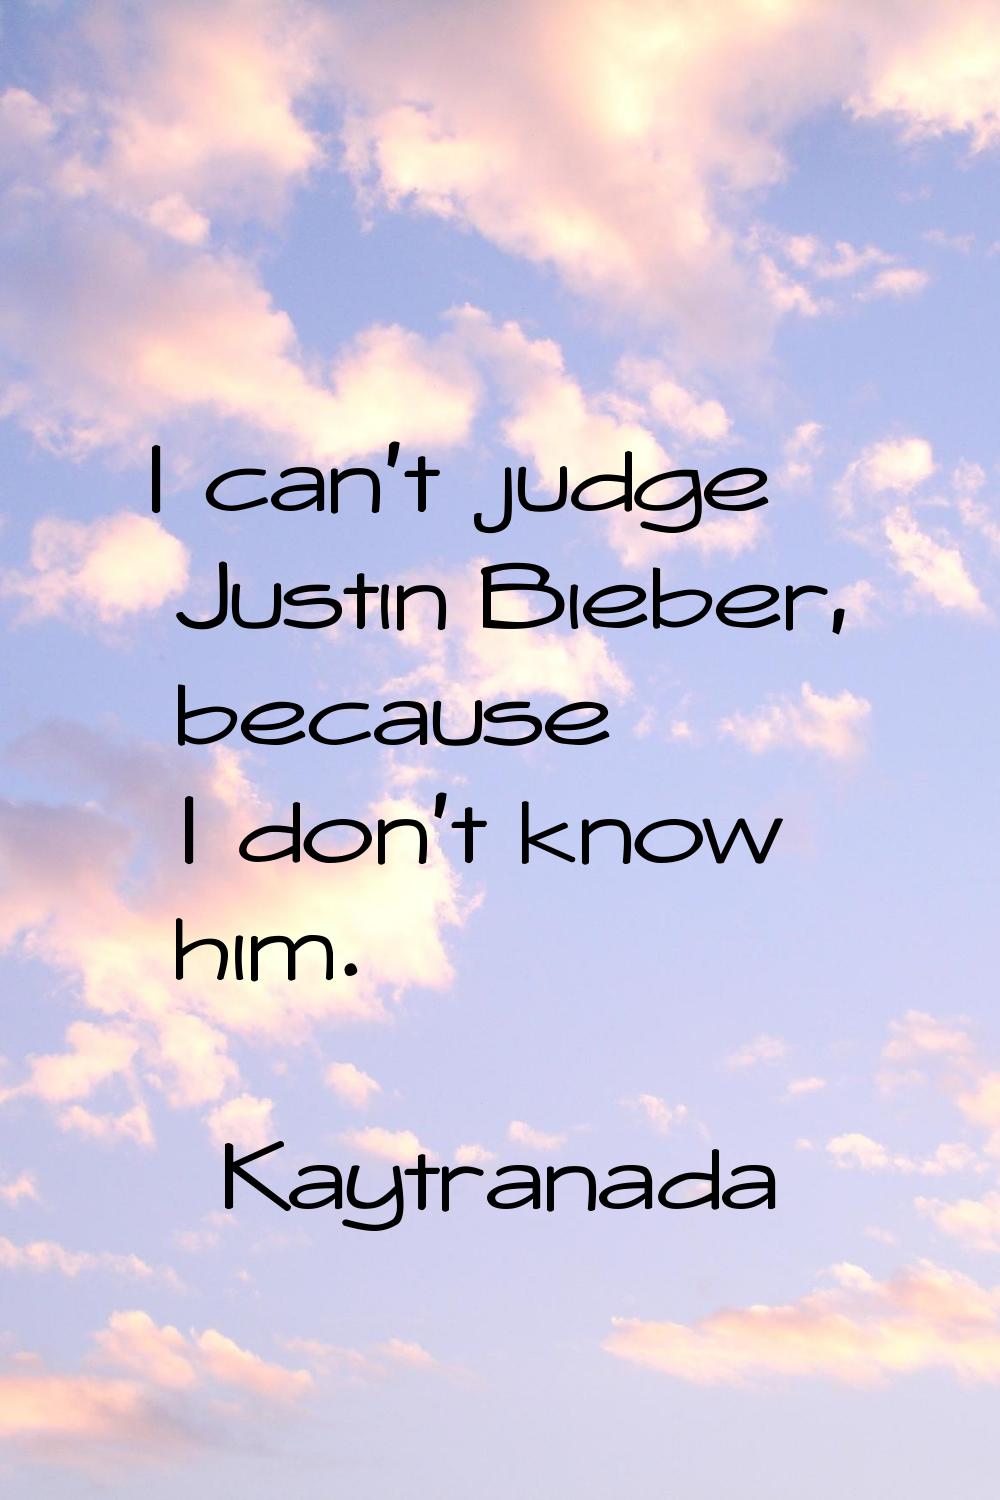 I can't judge Justin Bieber, because I don't know him.